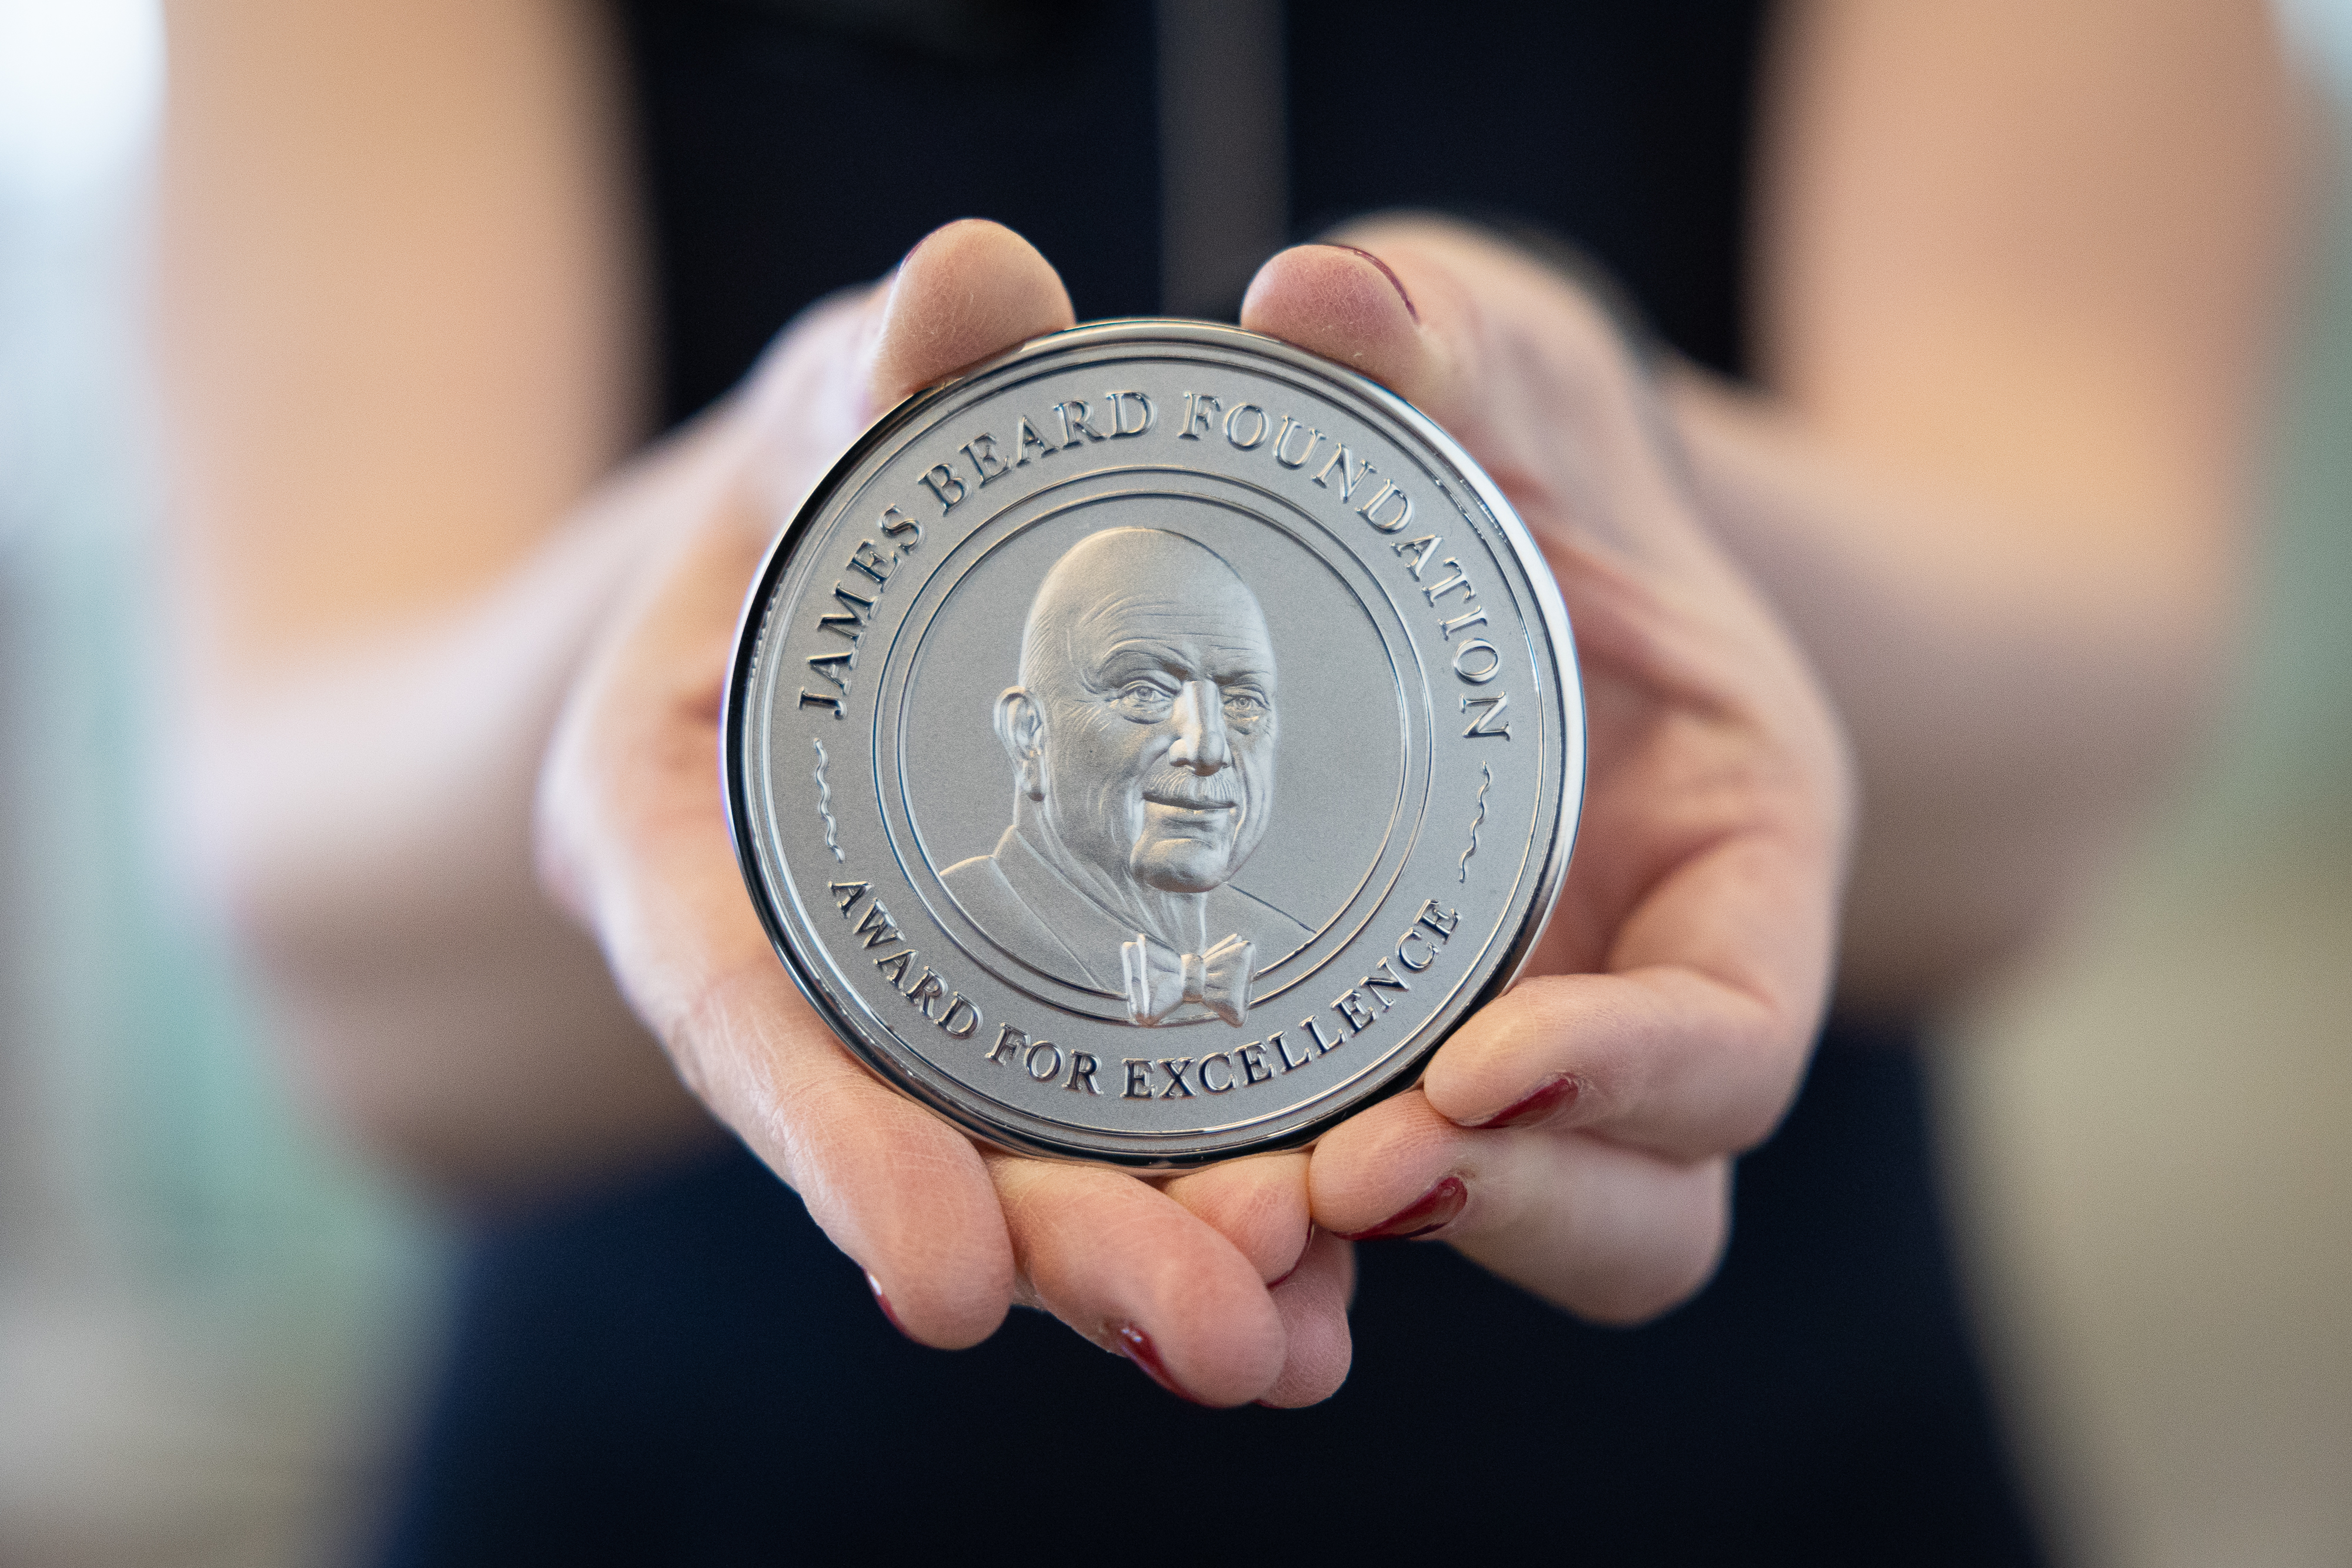 A woman holds a silver James Beard Foundation medal towards the camera, in the center of the shot.